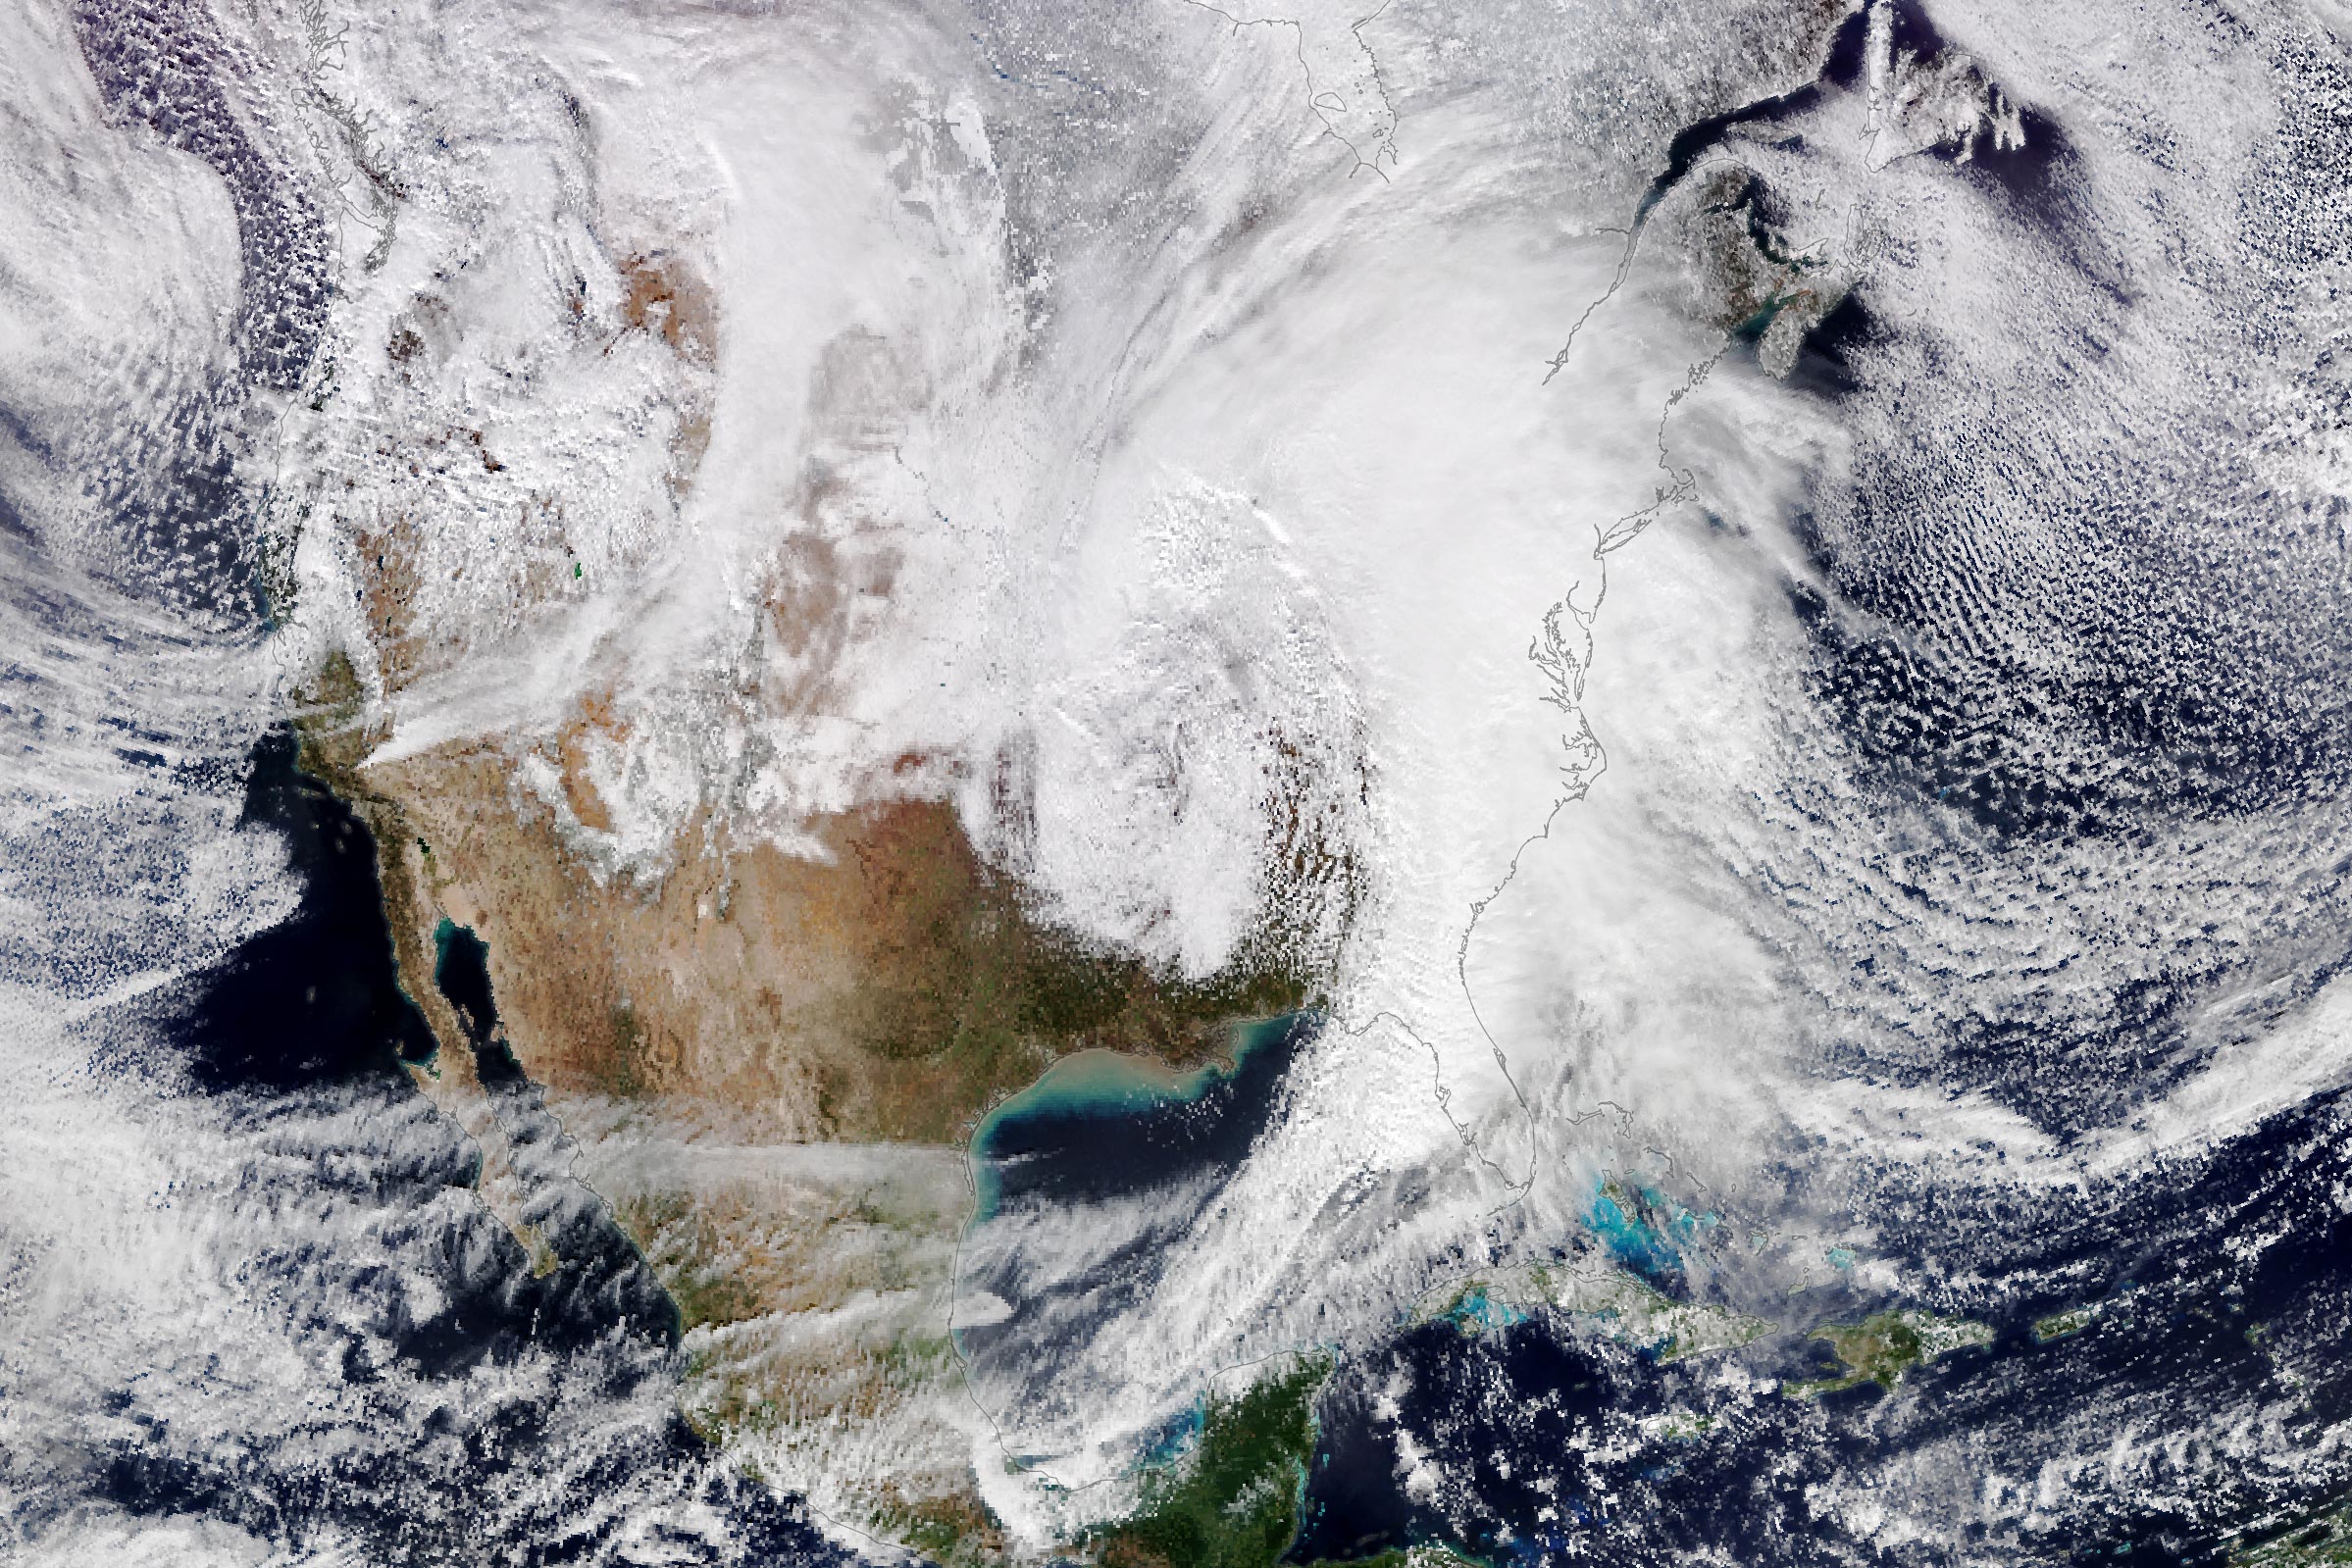 Atmospheric Battles How Intense Updrafts Shaped the Winter Storm